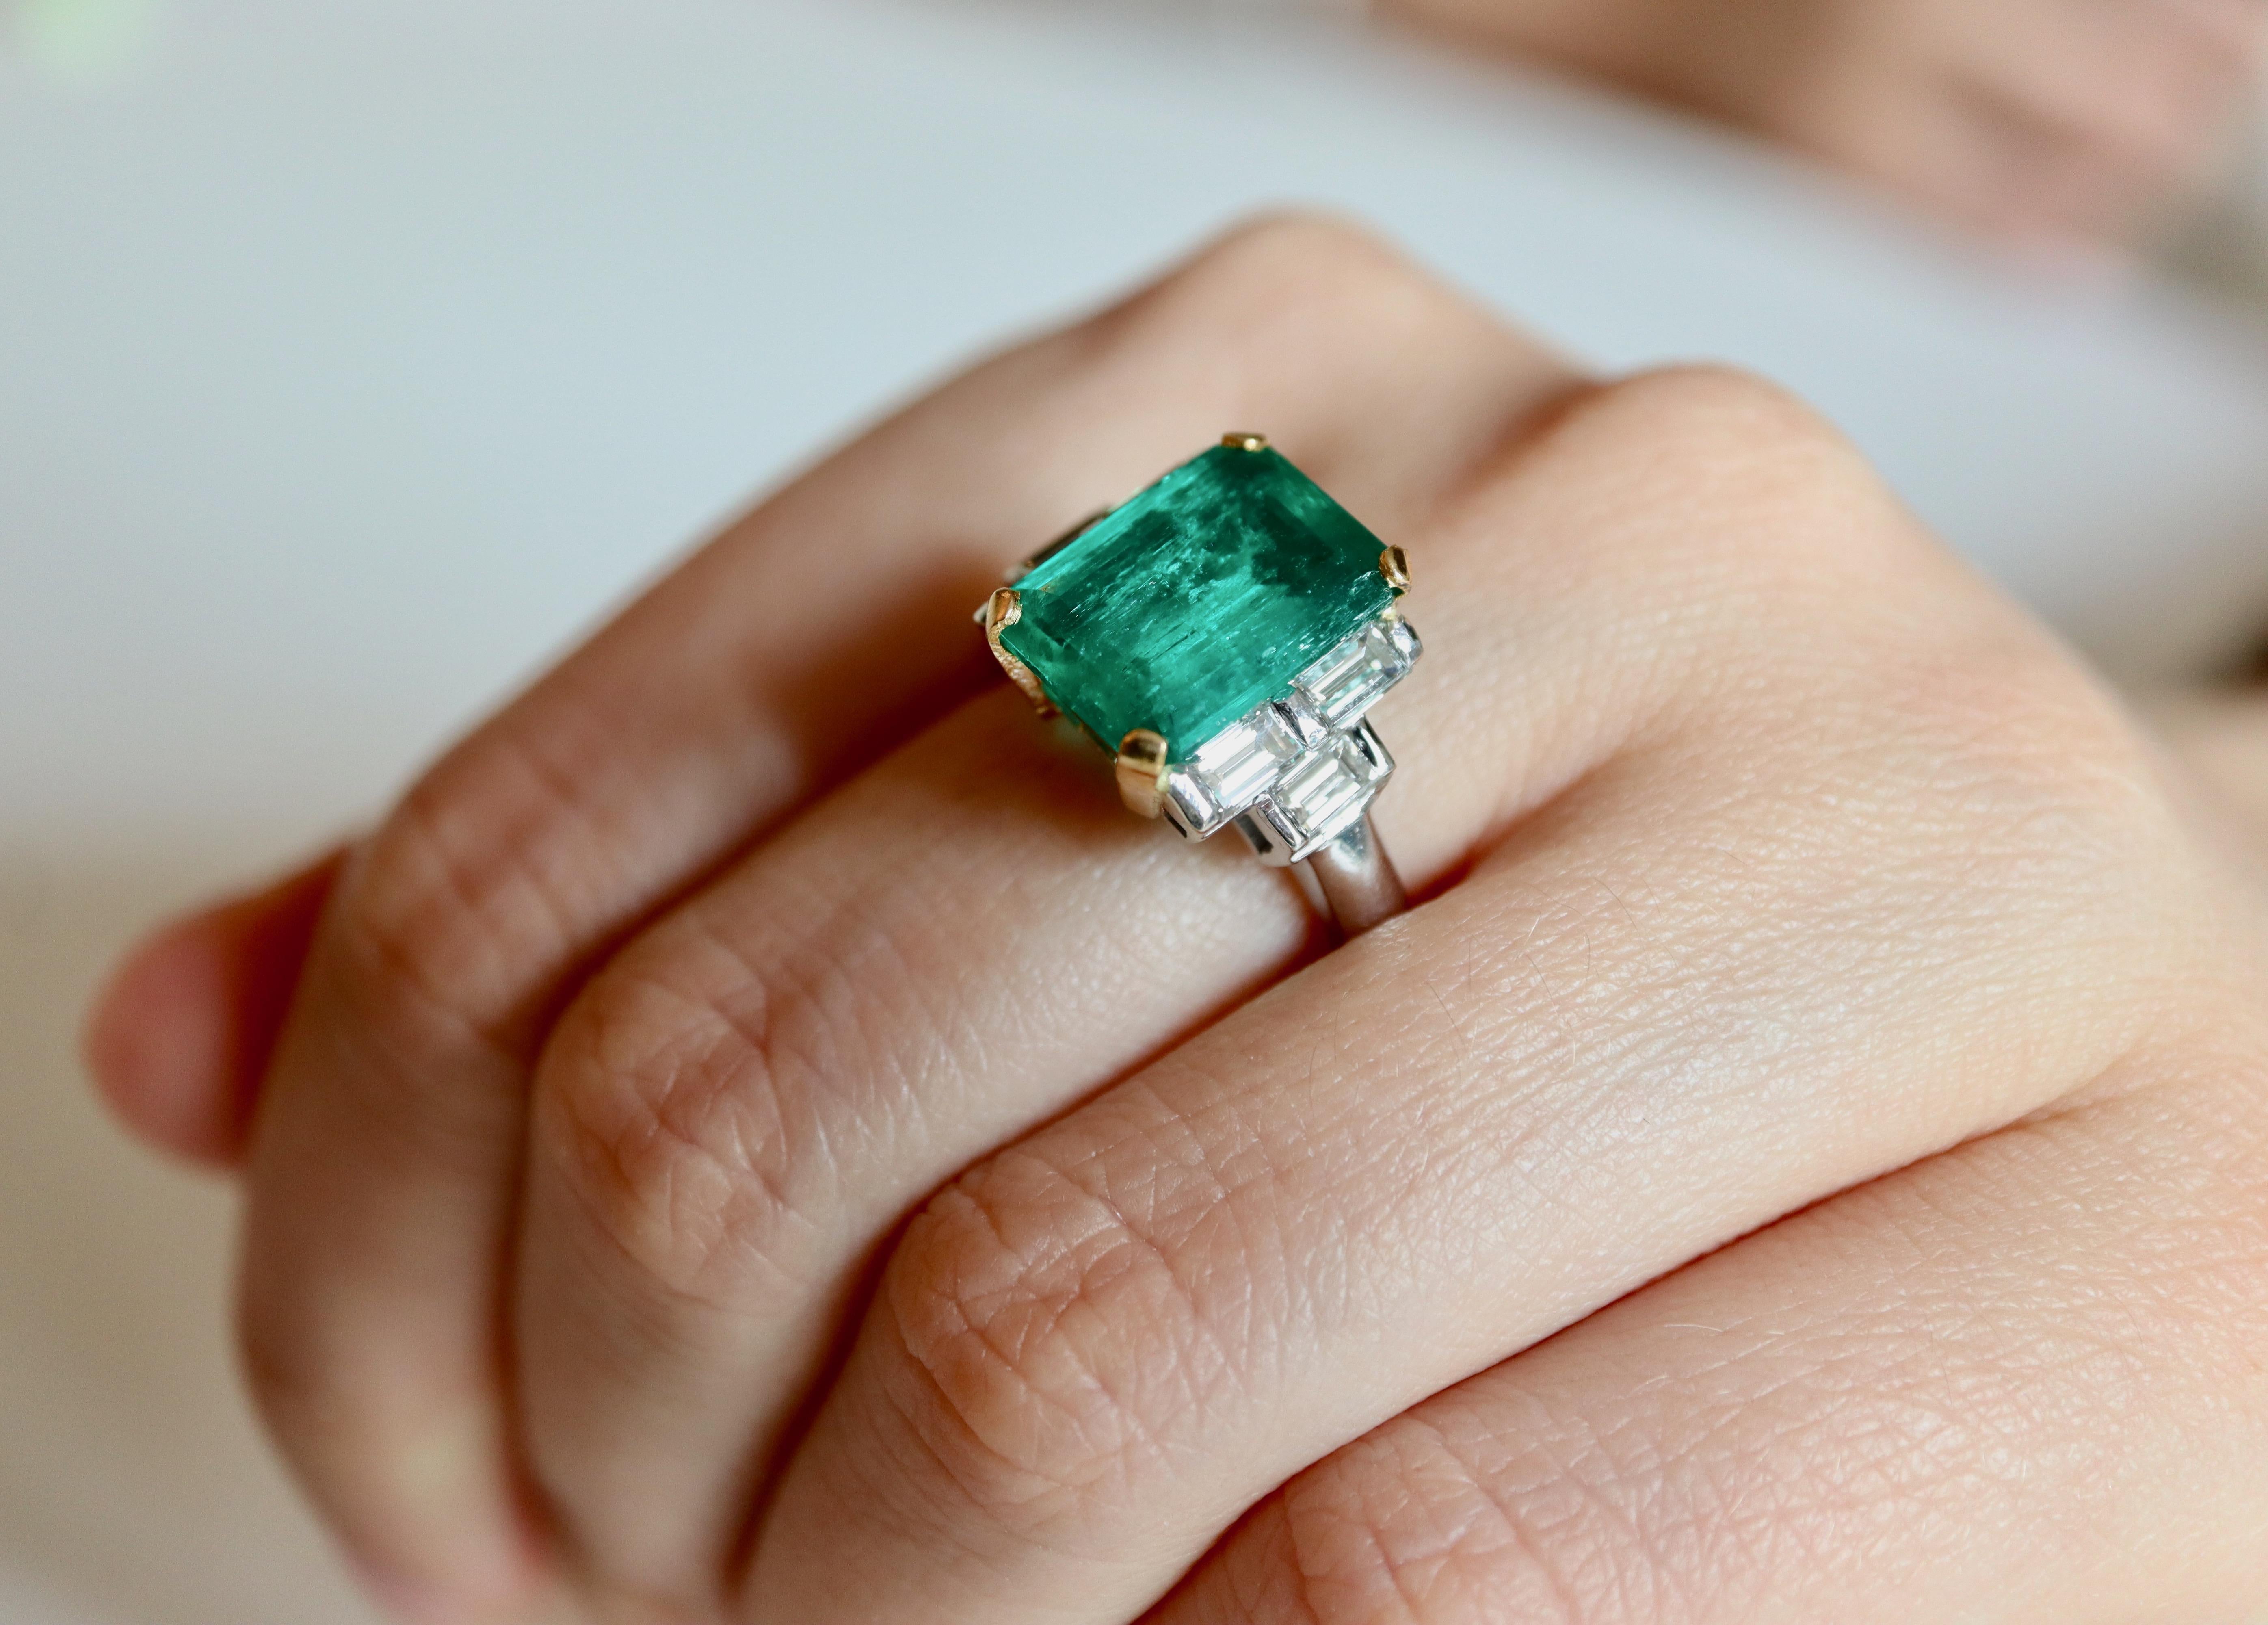 18-karat yellow and white gold diamond and emerald ring 3.71 carats
Ring in 18-carat white gold, basket in 18-carat yellow gold holding in its center a large prong-set emerald-cut emerald weighing 3.71 carats. The 18-carat white gold setting is set